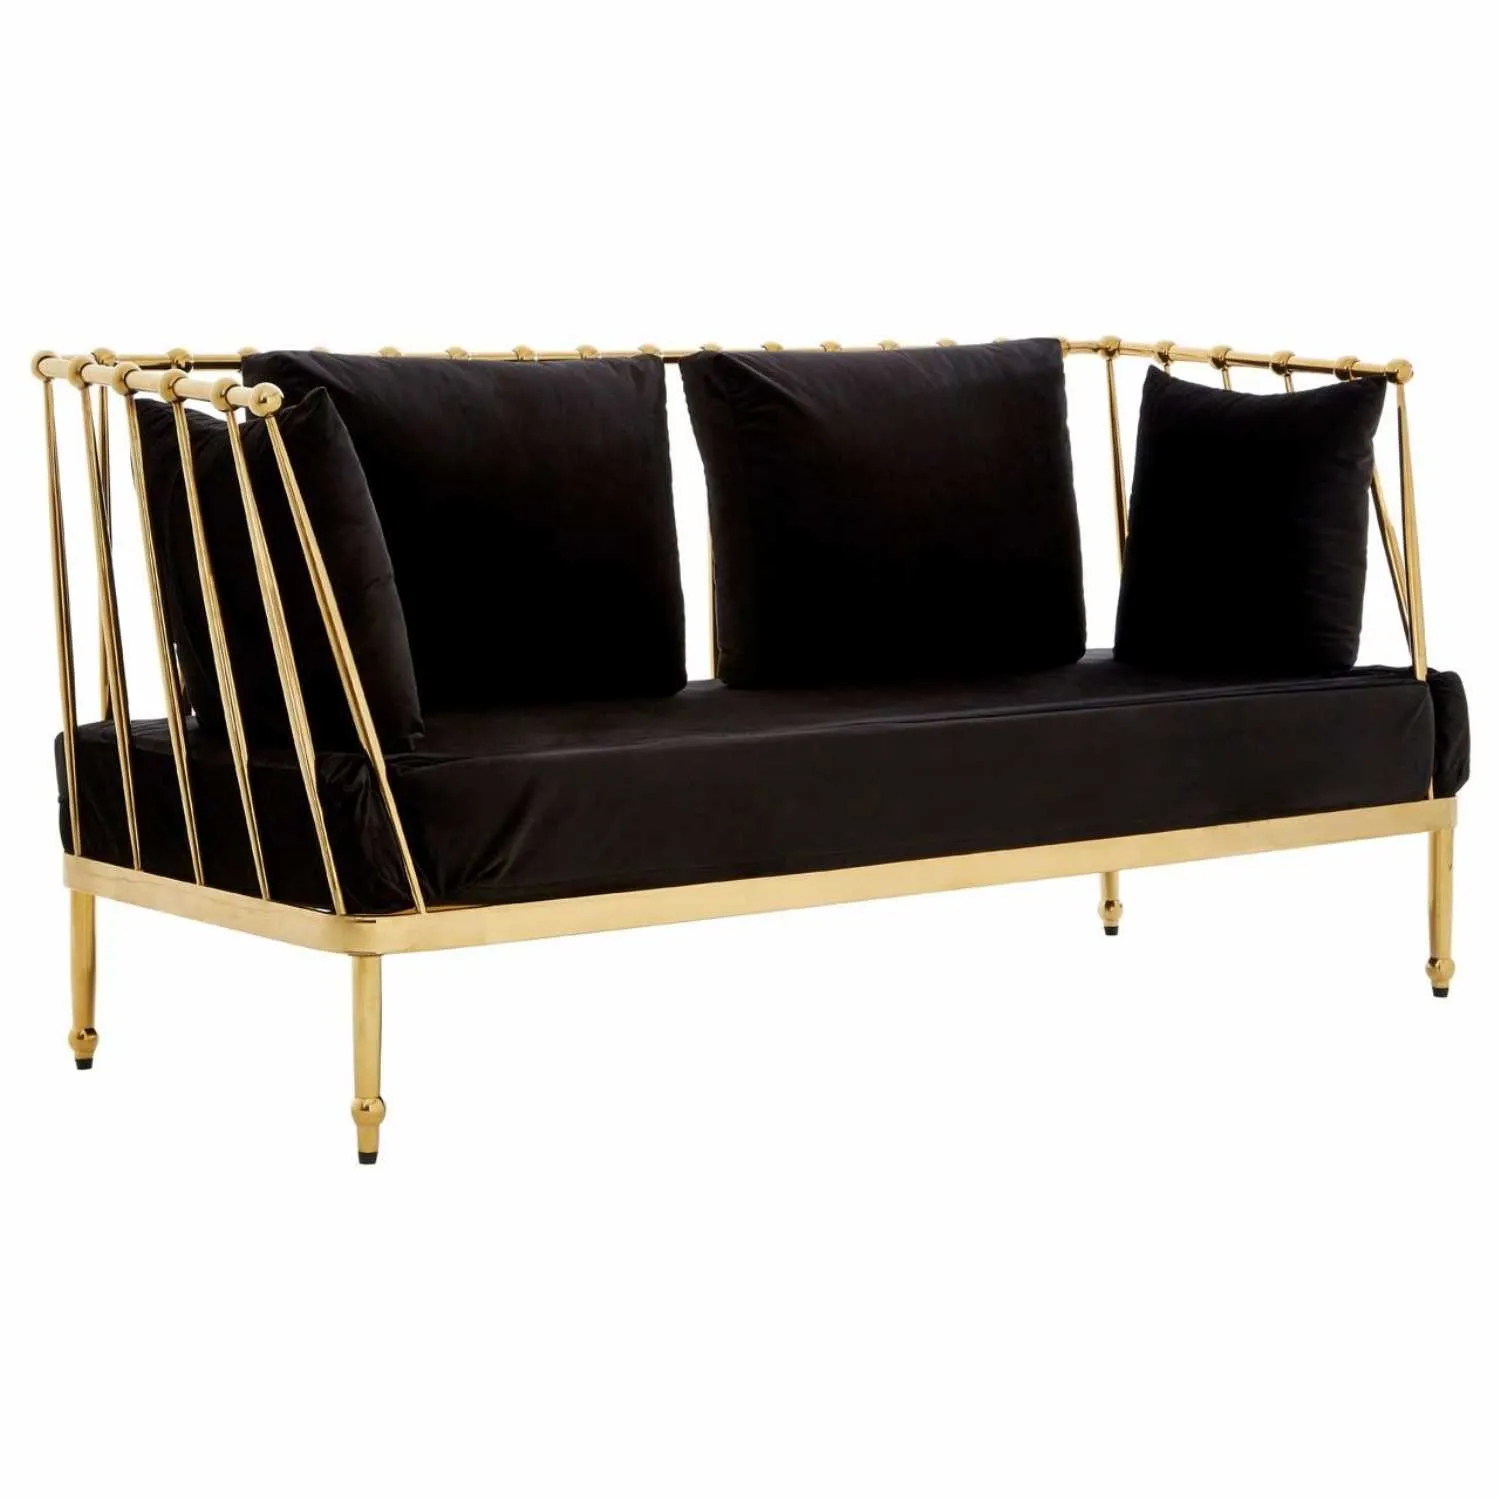 2 Seater Black Fabric Upholstered Gold Finish Tapered Arms Sofa